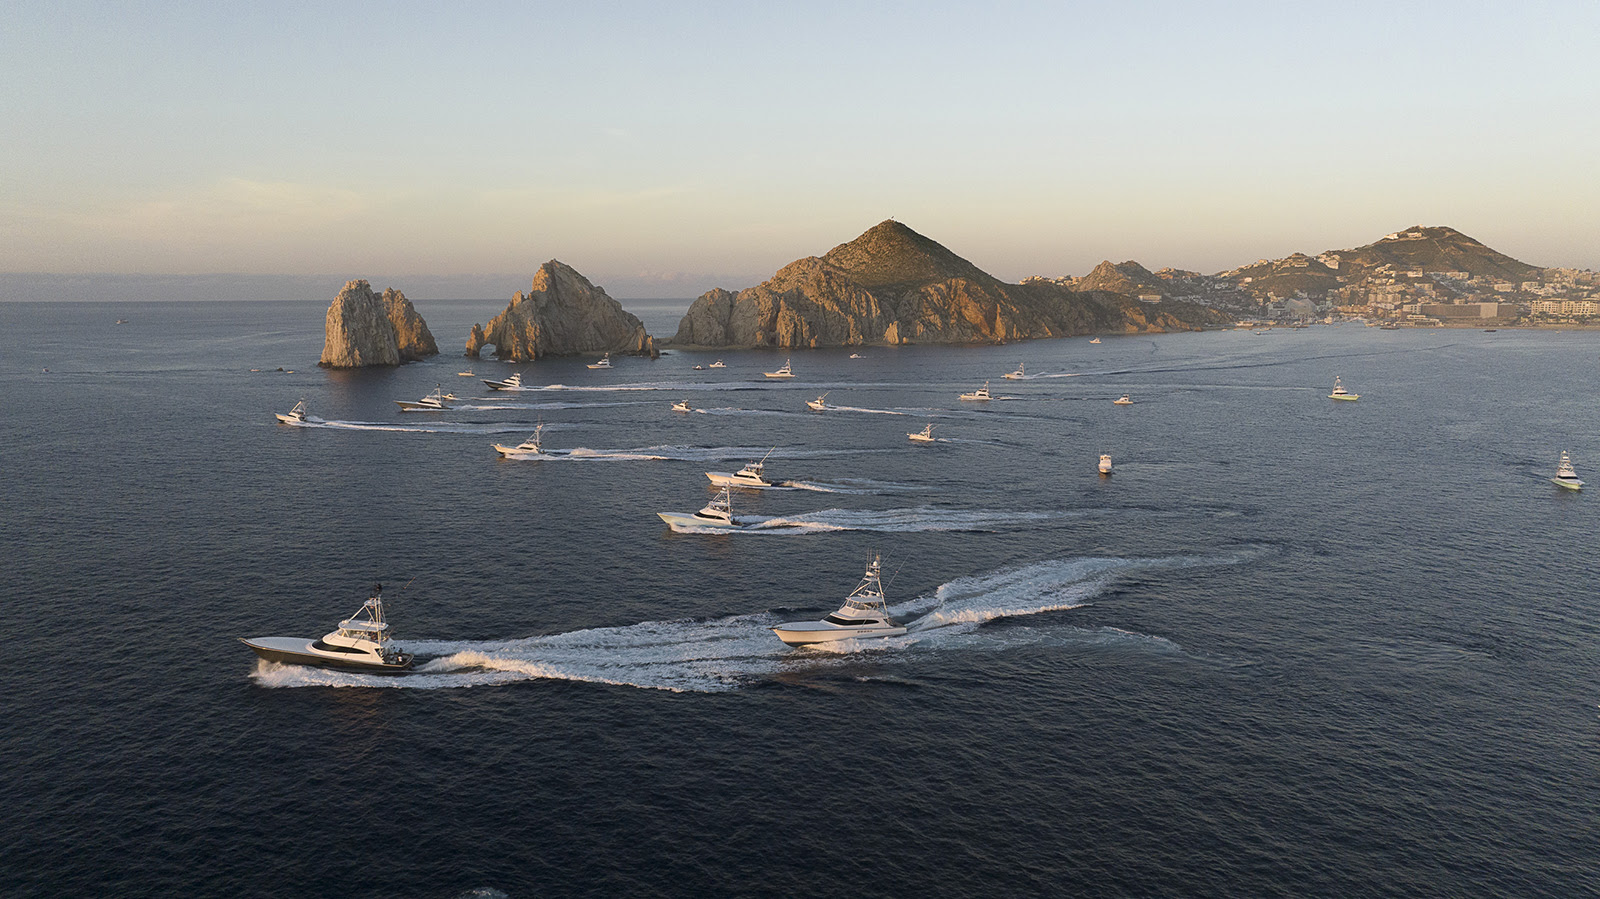 There’s still time to fish the Los Cabos Billfish Tournament with us October 15-19, 2023